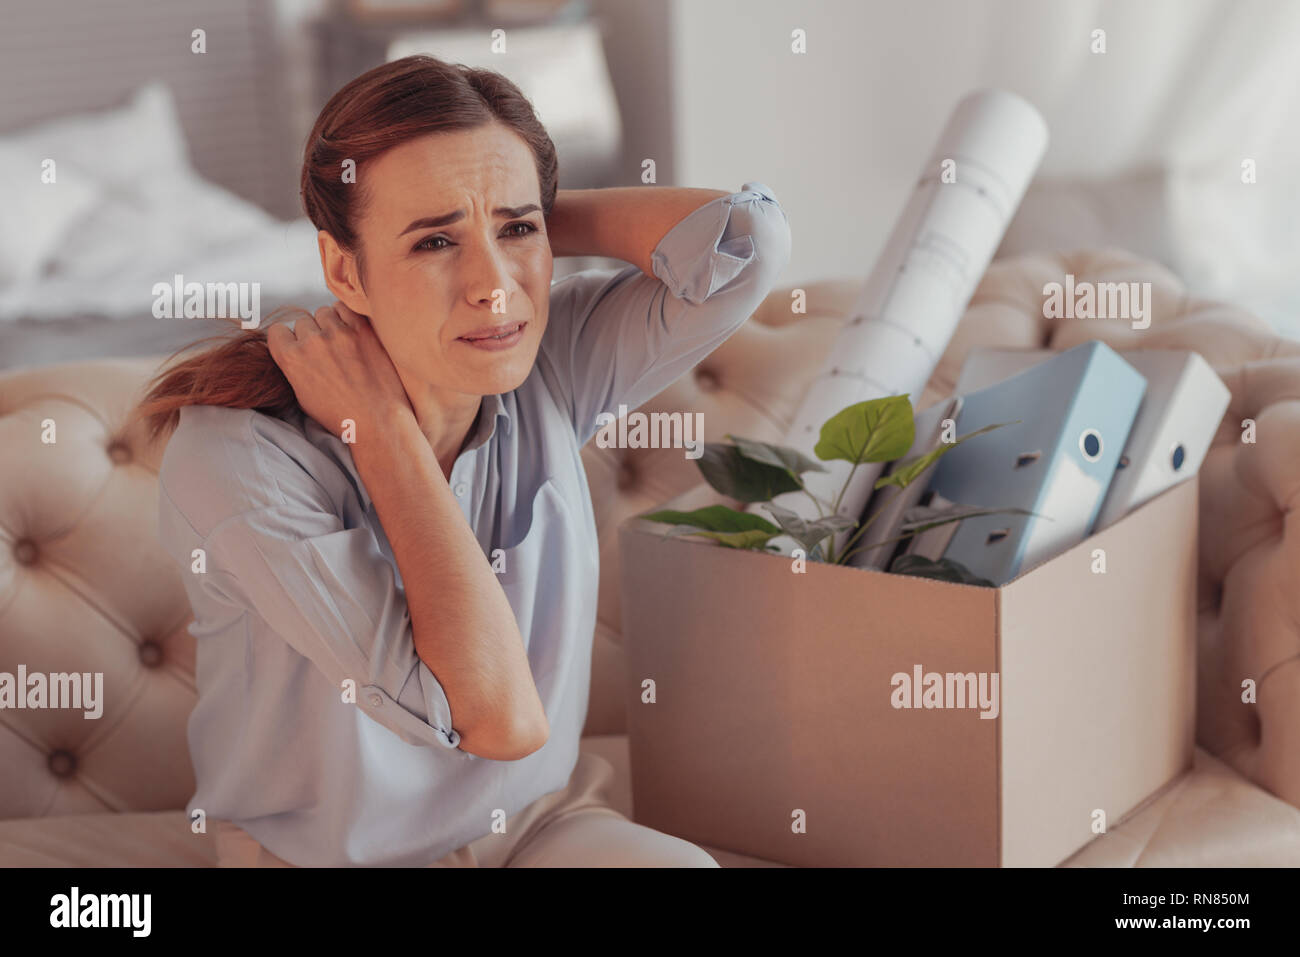 Job problems. Portrait of upset young woman looking away and touching her neck while crying on the sofa with the stuff from her former work Stock Photo